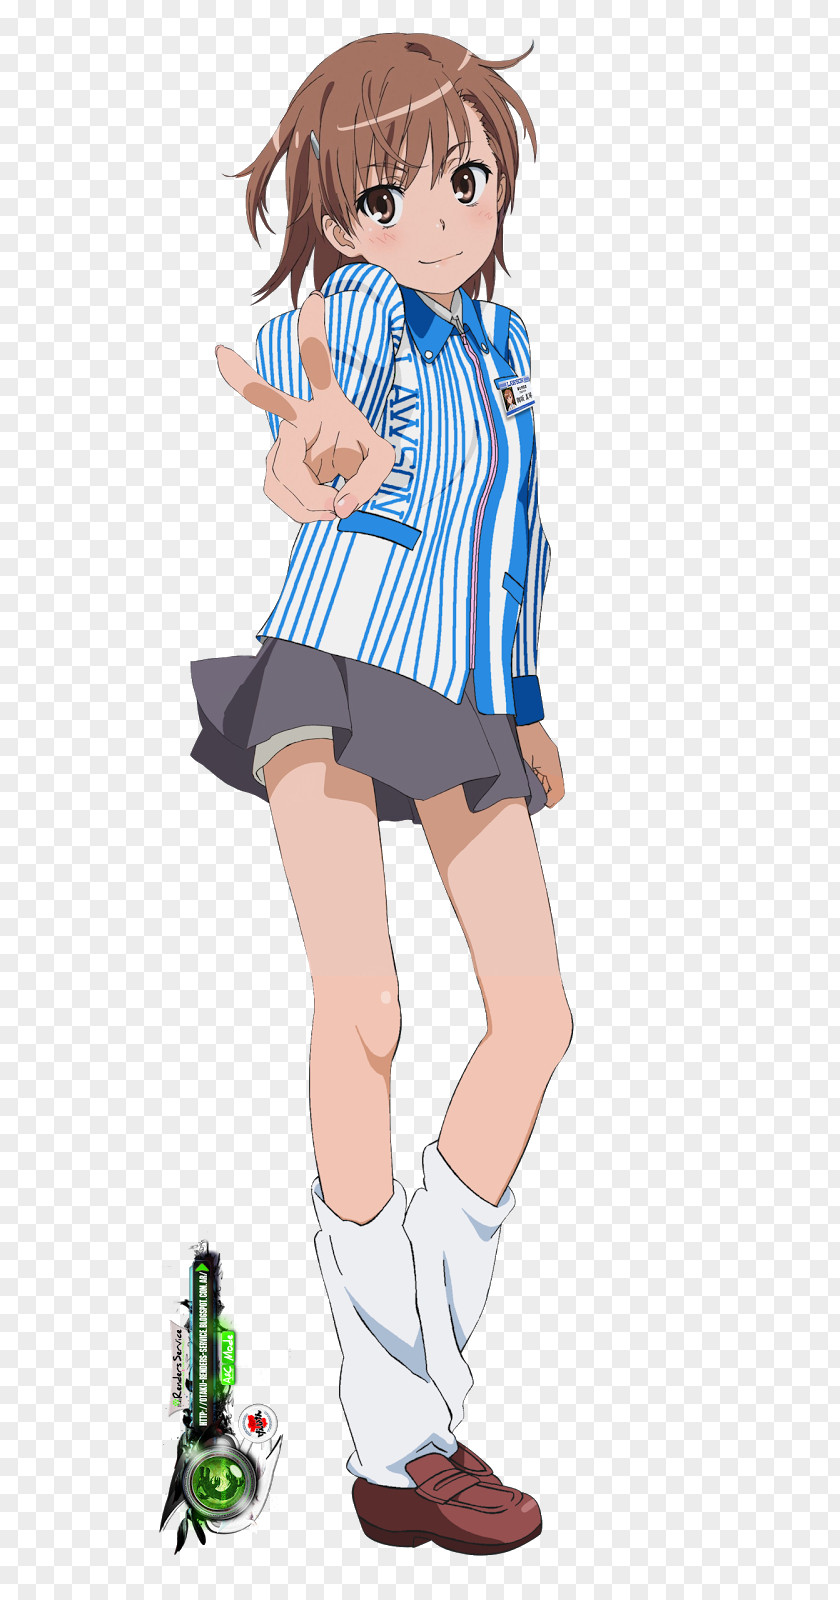 Mikoto Misaka A Certain Scientific Railgun Magical Index Anime PNG Anime, and pleated skirt clipart PNG